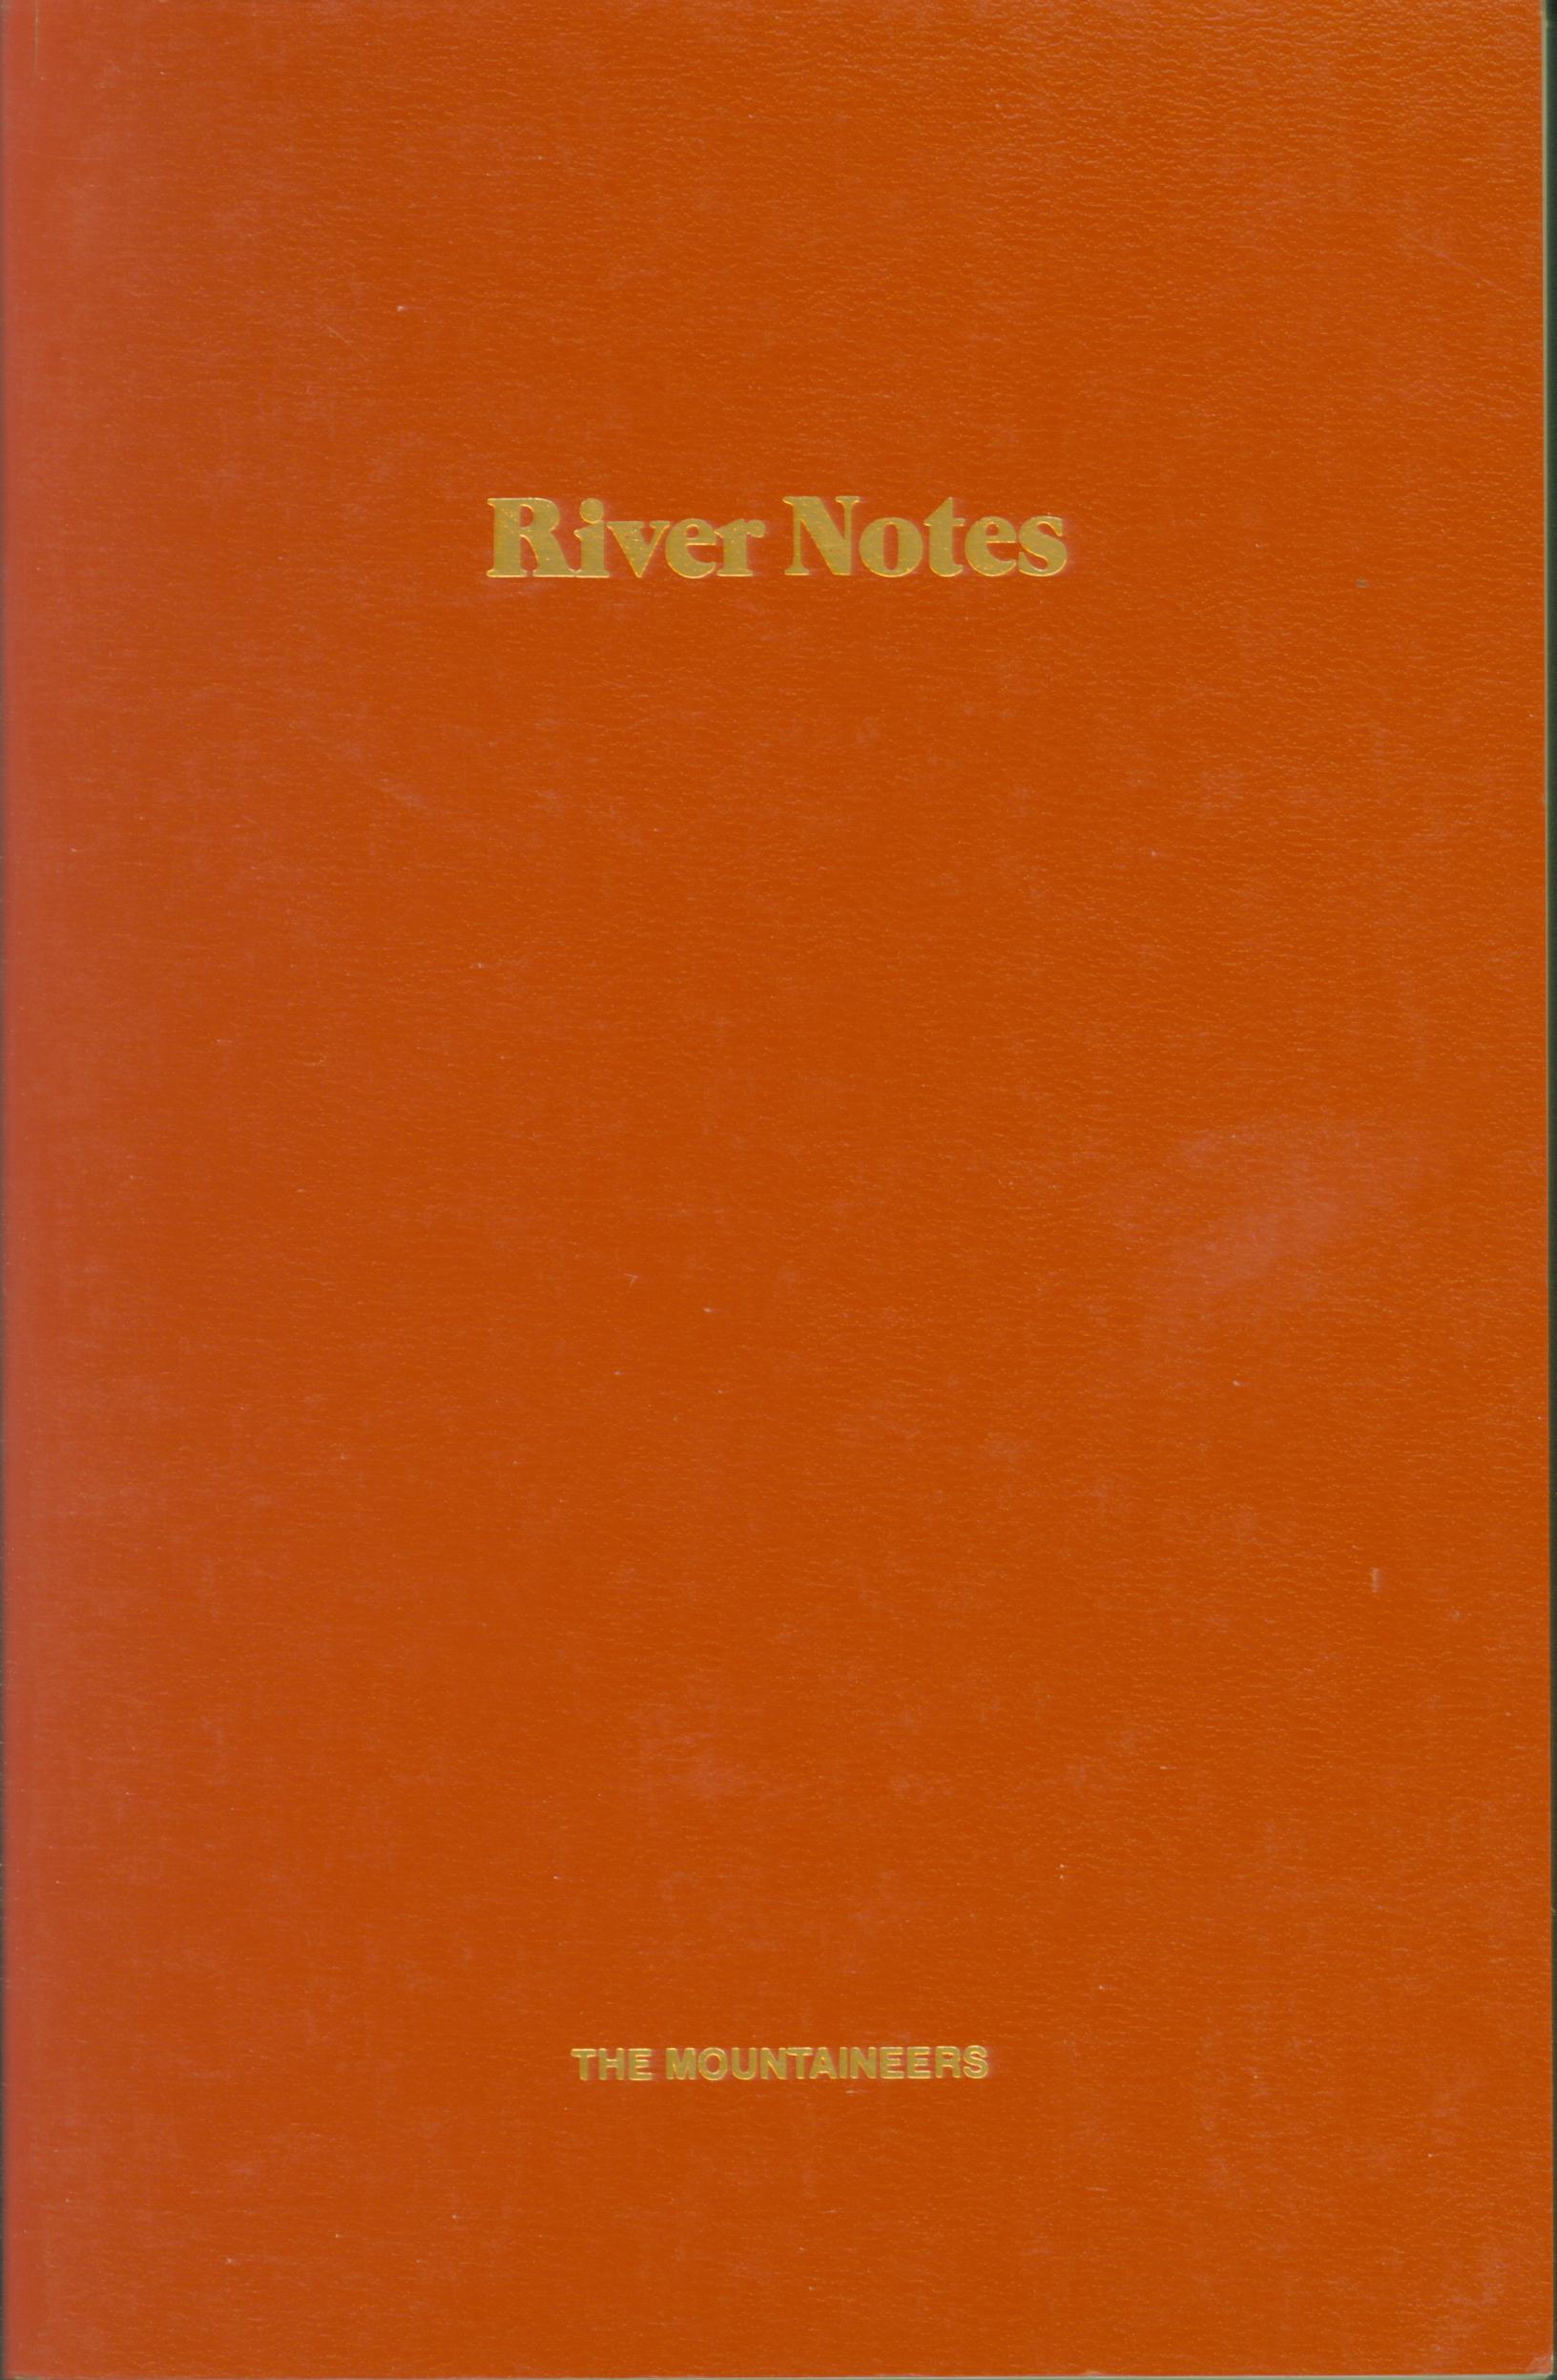 RIVER NOTES. 